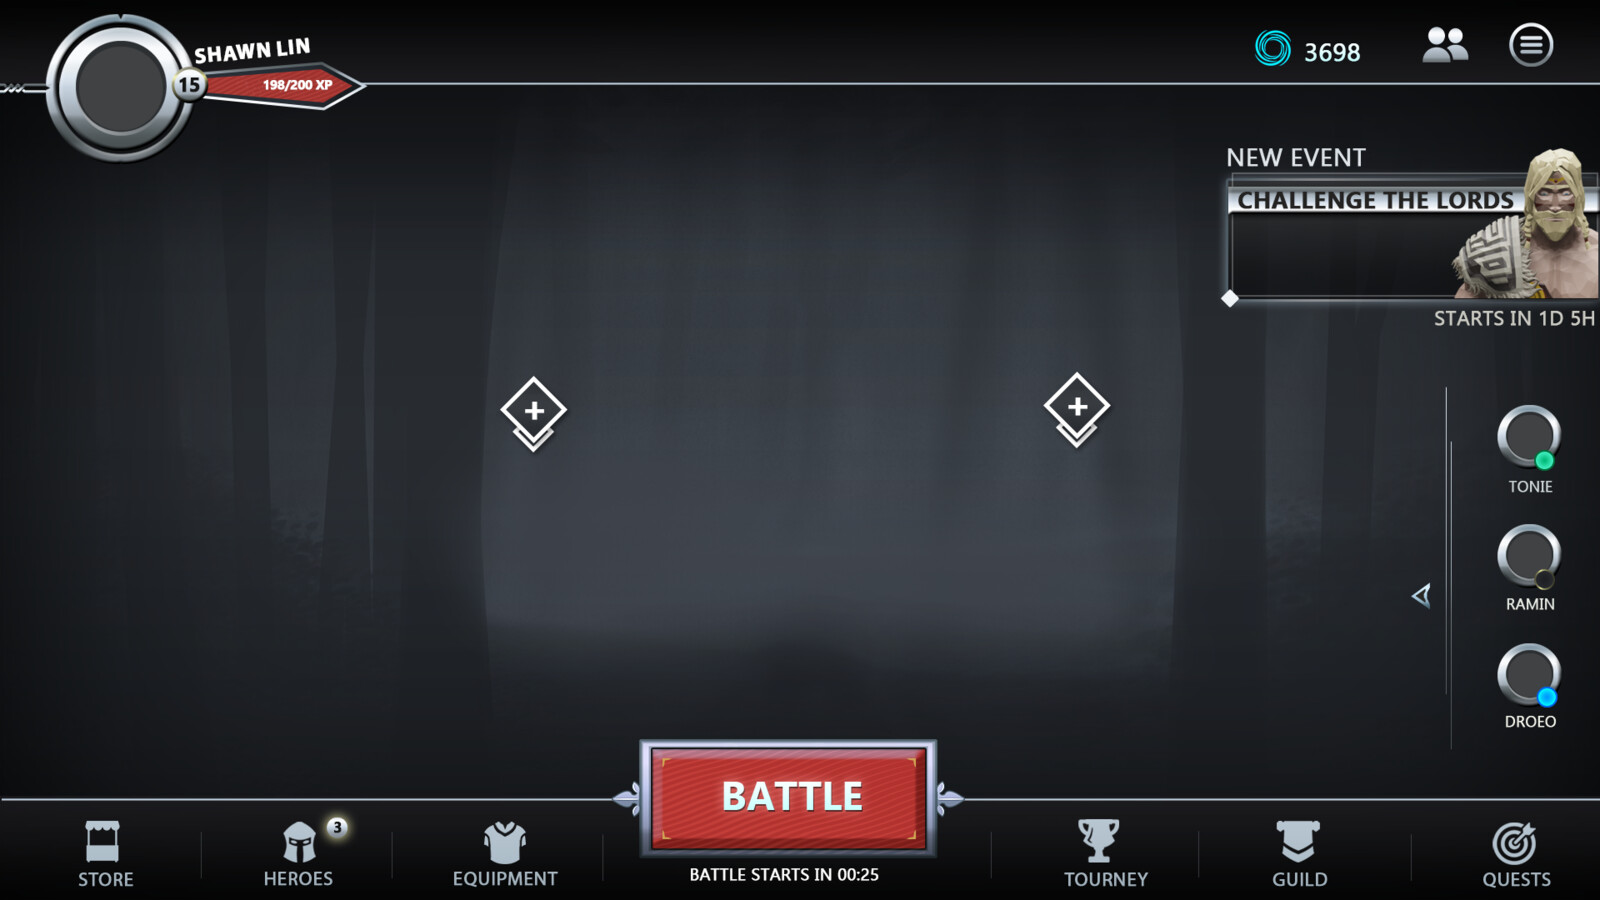 Transparent UI, which is made to blend with any background. The profile picture is created creatively, where the progression of the player's XP is shown in a Sword.